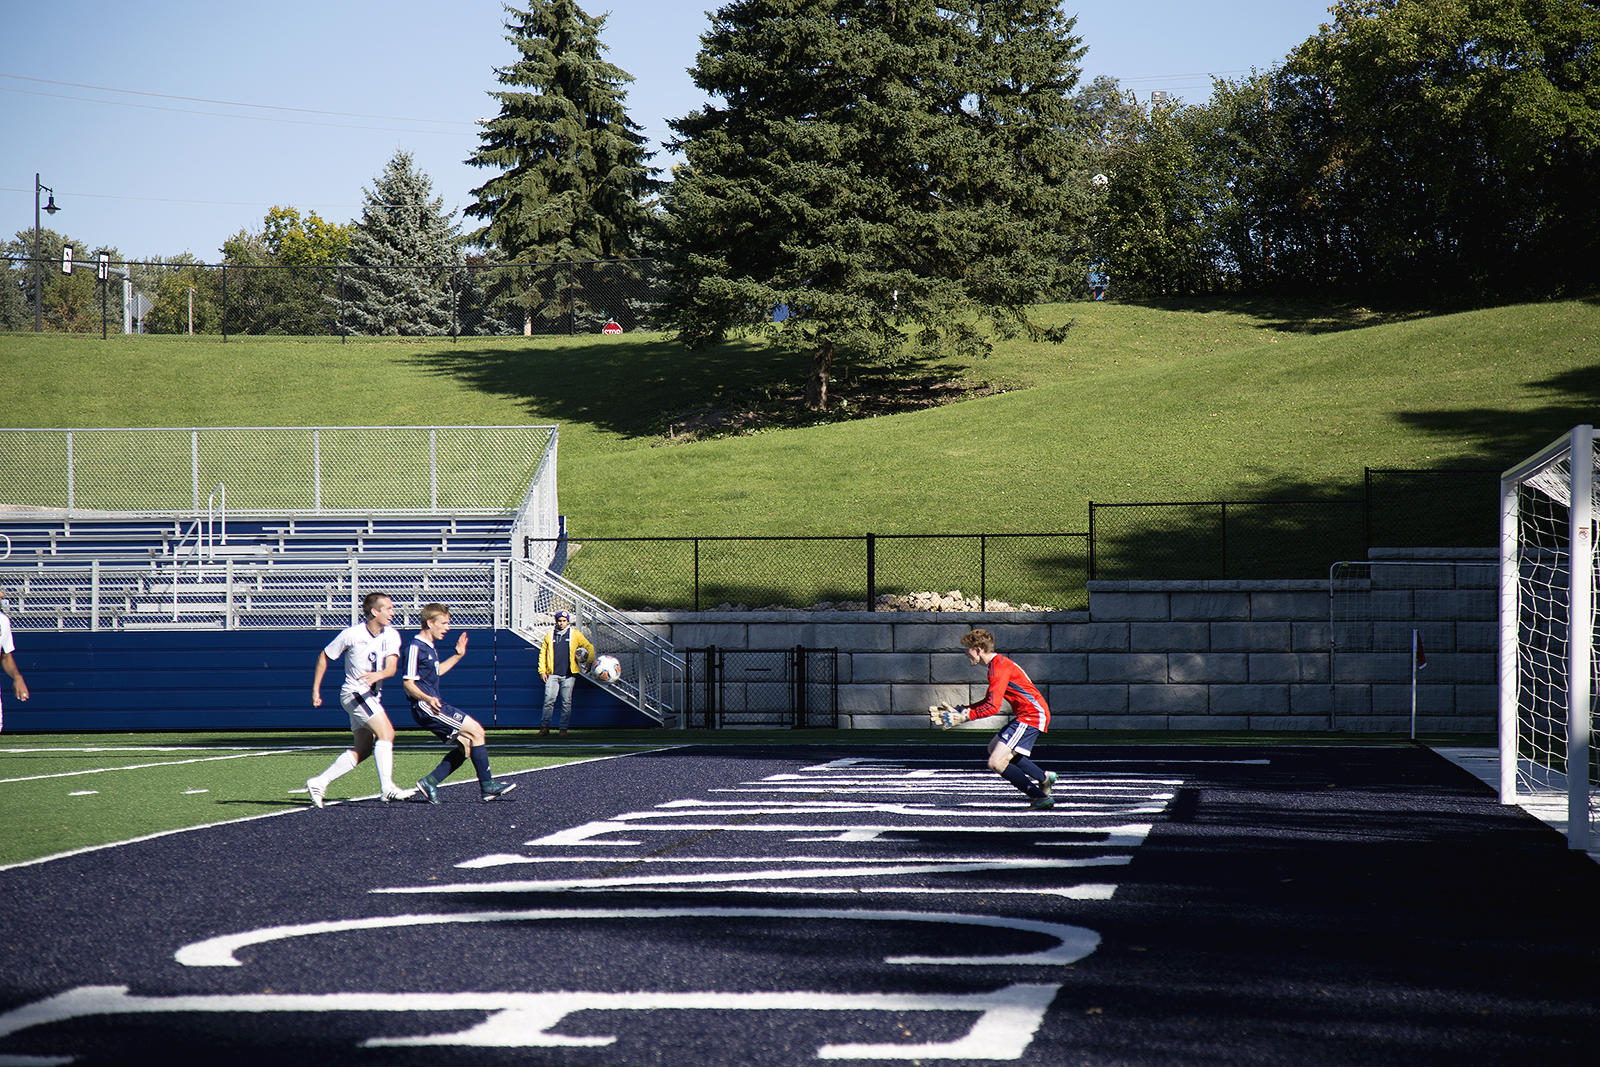 Soccer charged to a decisive 8-0 win over Maranatha Baptist on Oct. 8. Photo by Victor Nguyen